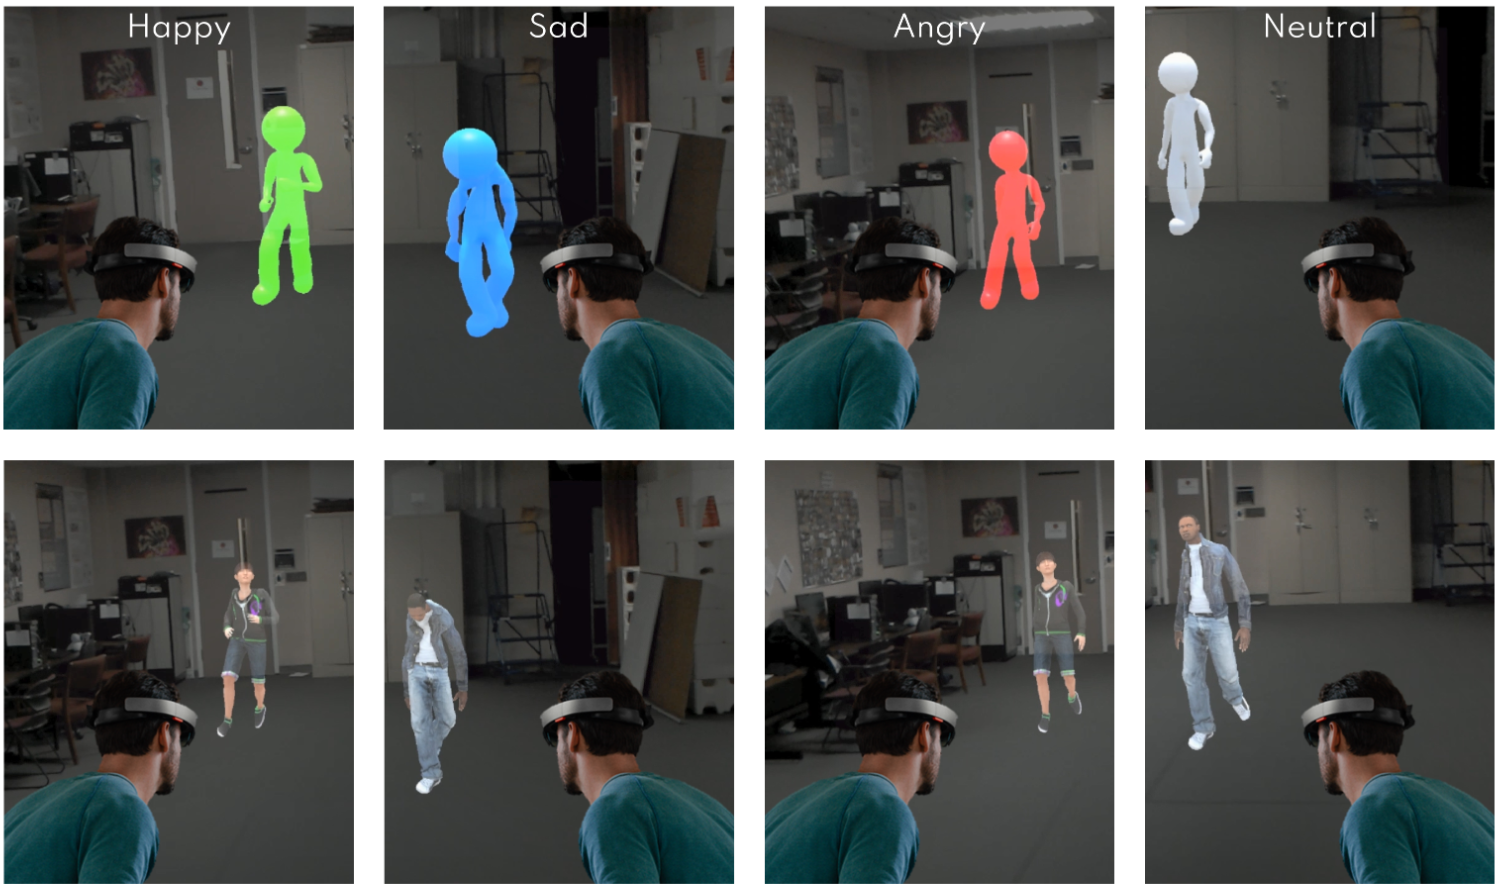 Our emotionally expressive agents in an AR environment.